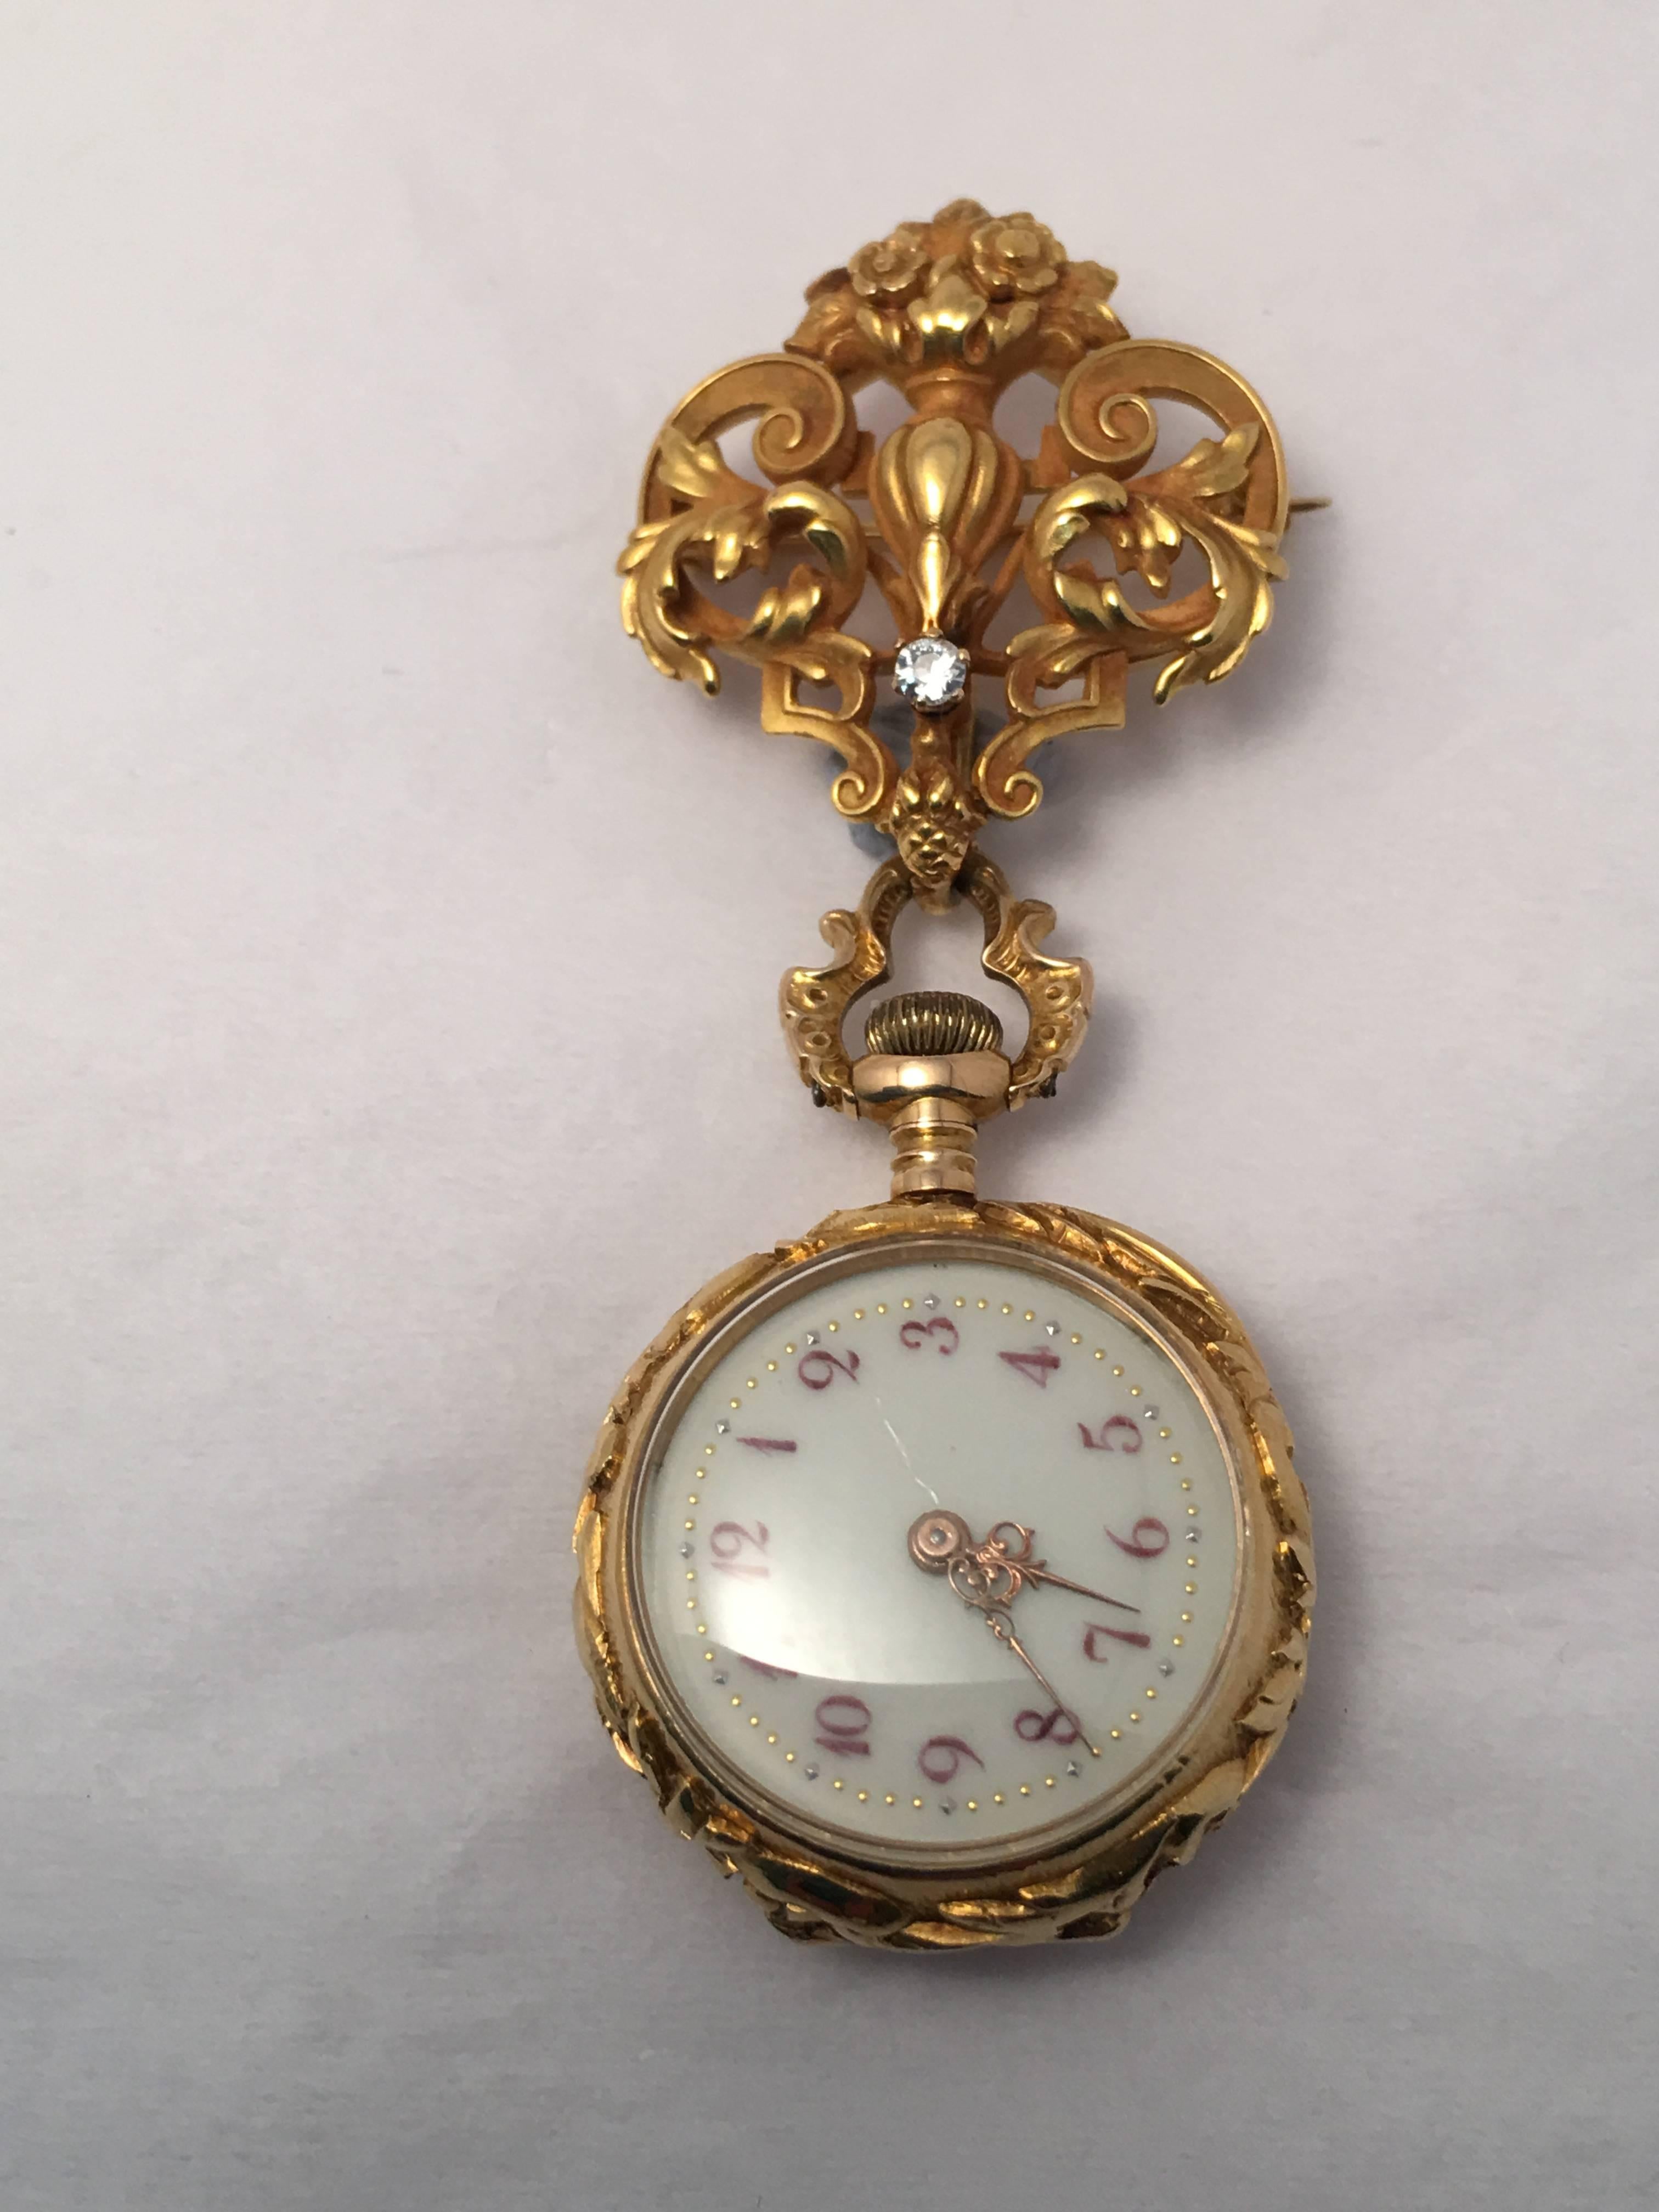 This 18 kt. yellow gold Art Nouveau Demi Hunter lapel watch hangs from an original Art Nouveau watch hanger which is set with one old European cut diamond weighing approximately .05 ct.  The watch is center set with one old European cut diamond